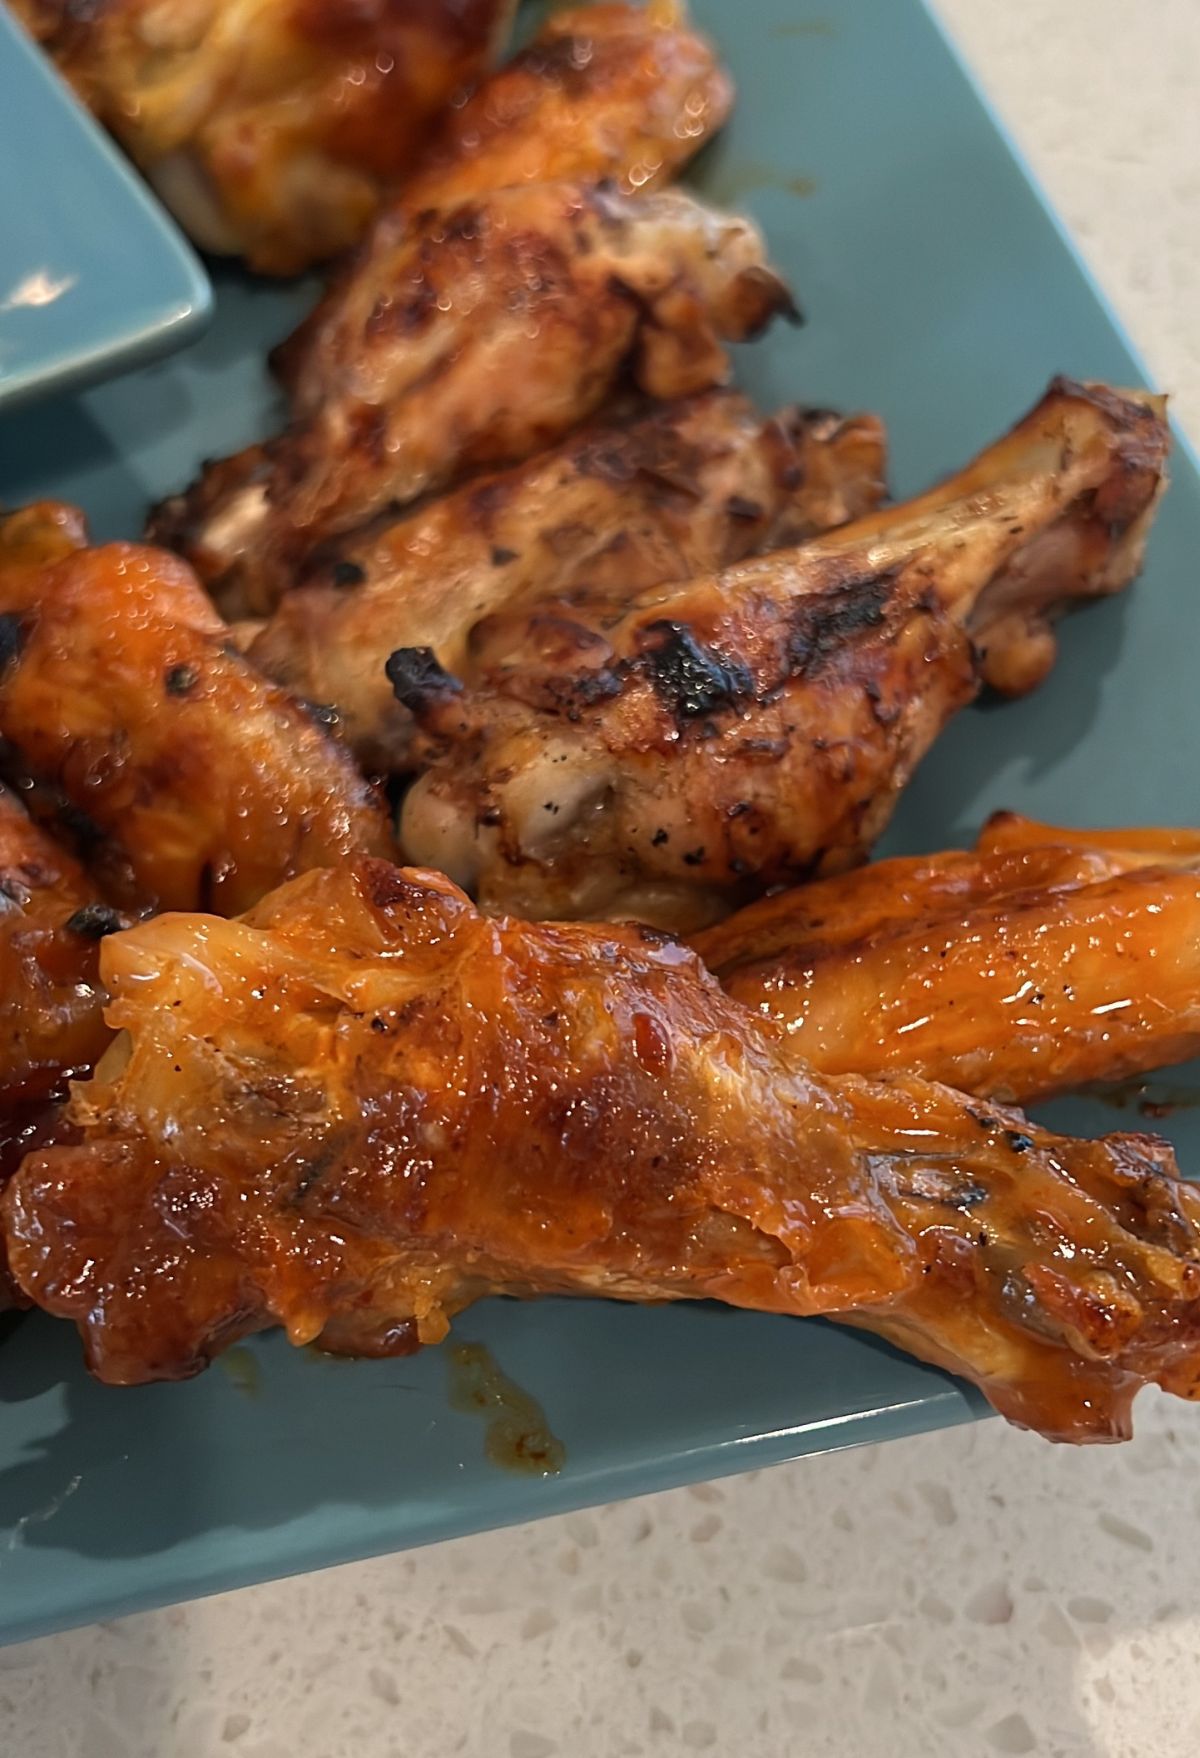 https://bestblackstonerecipes.com/wp-content/uploads/2022/12/Mastering-How-to-Cook-Wings-on-Blackstone-Griddle-3.jpg